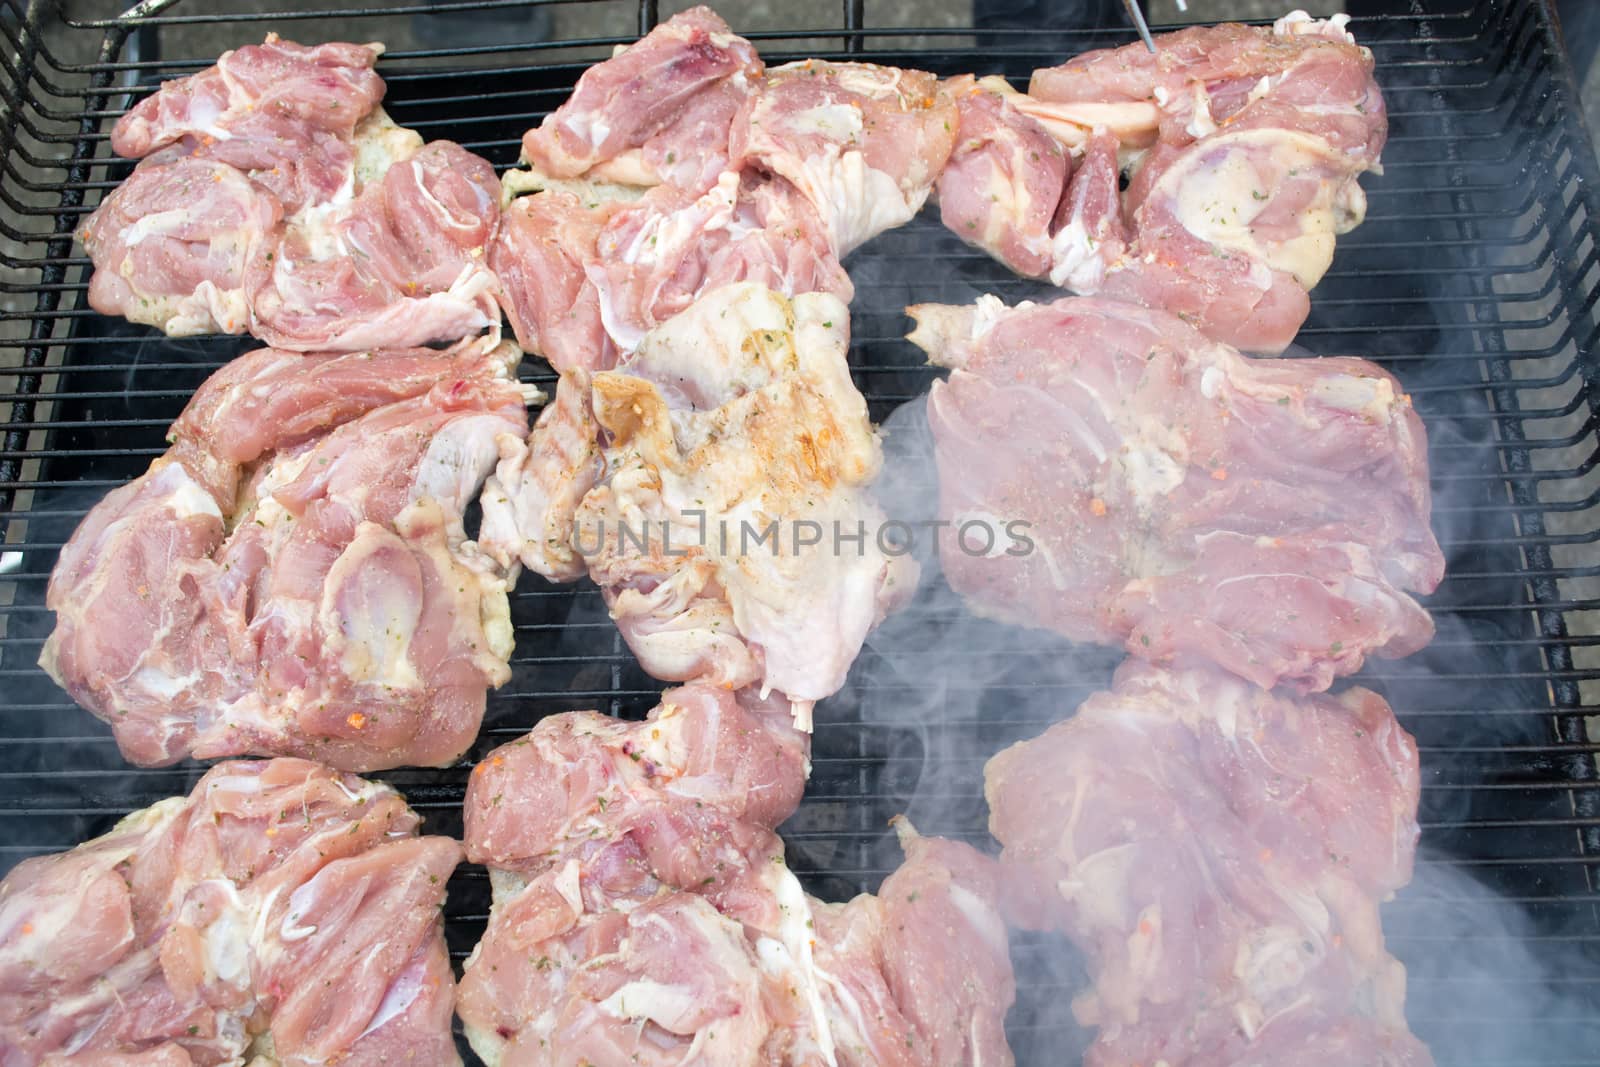 Raw pork chops on grill. Smoke rising from heated grill